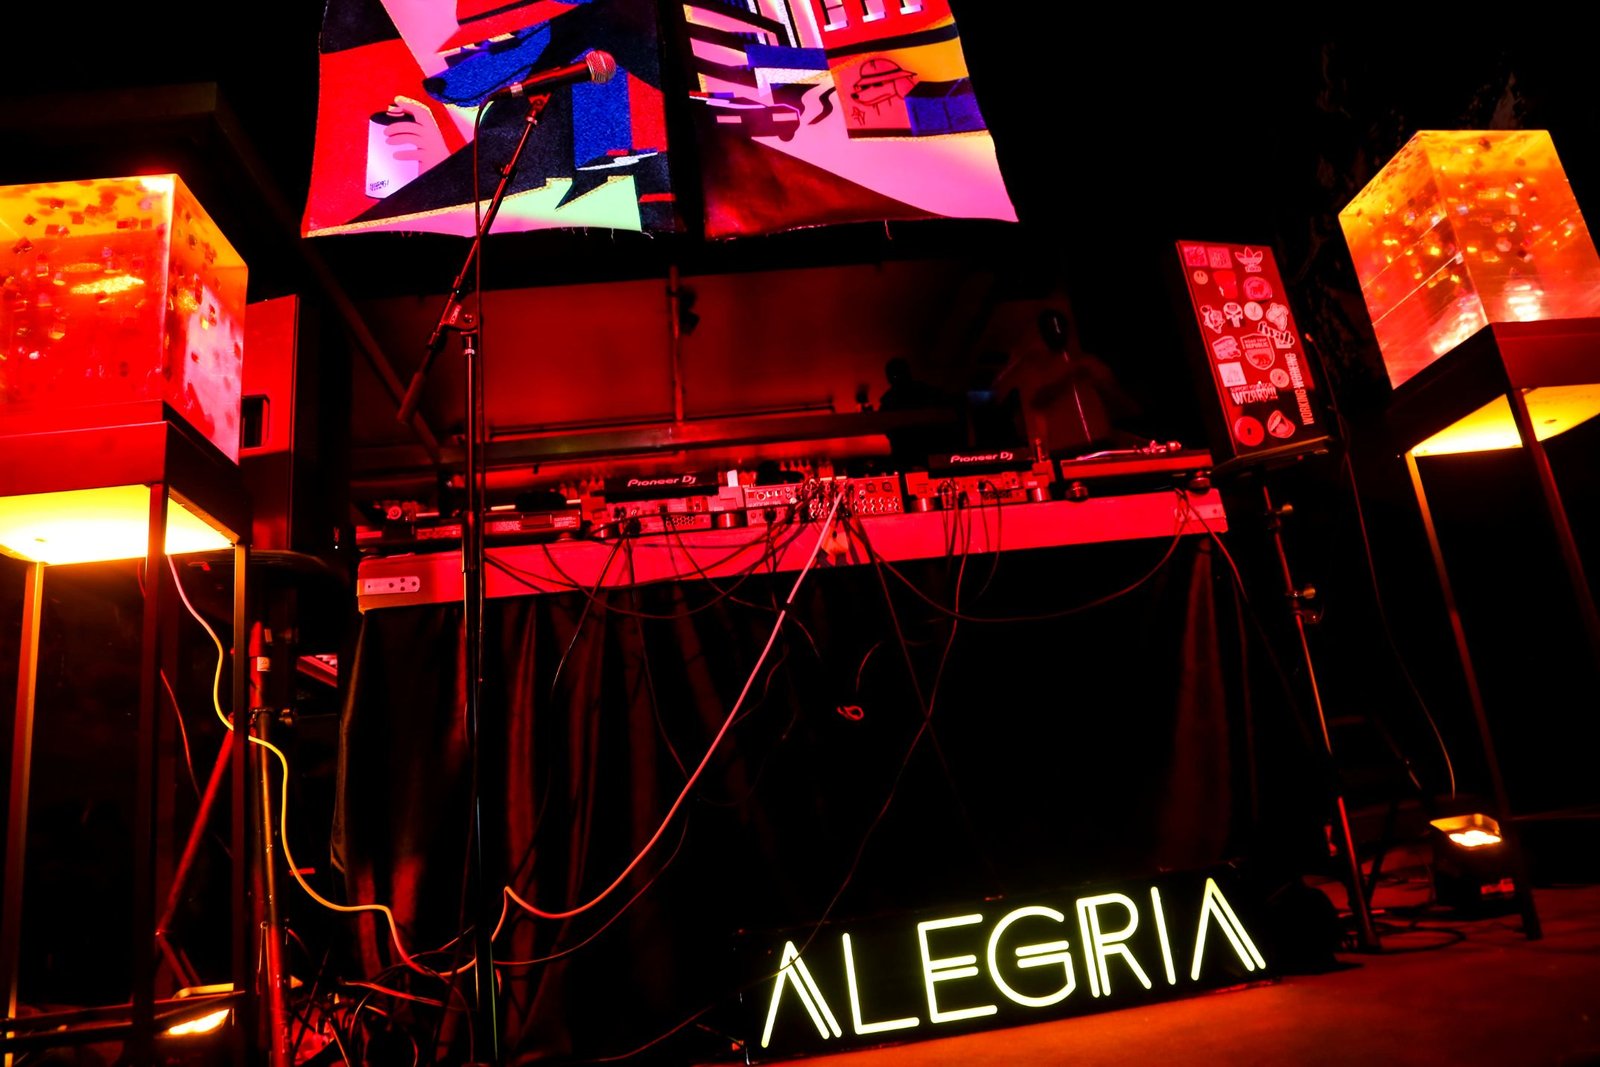 Gallery Alegria Nyc Conga Sep 23, 2022 Nyc Music label & curated art.